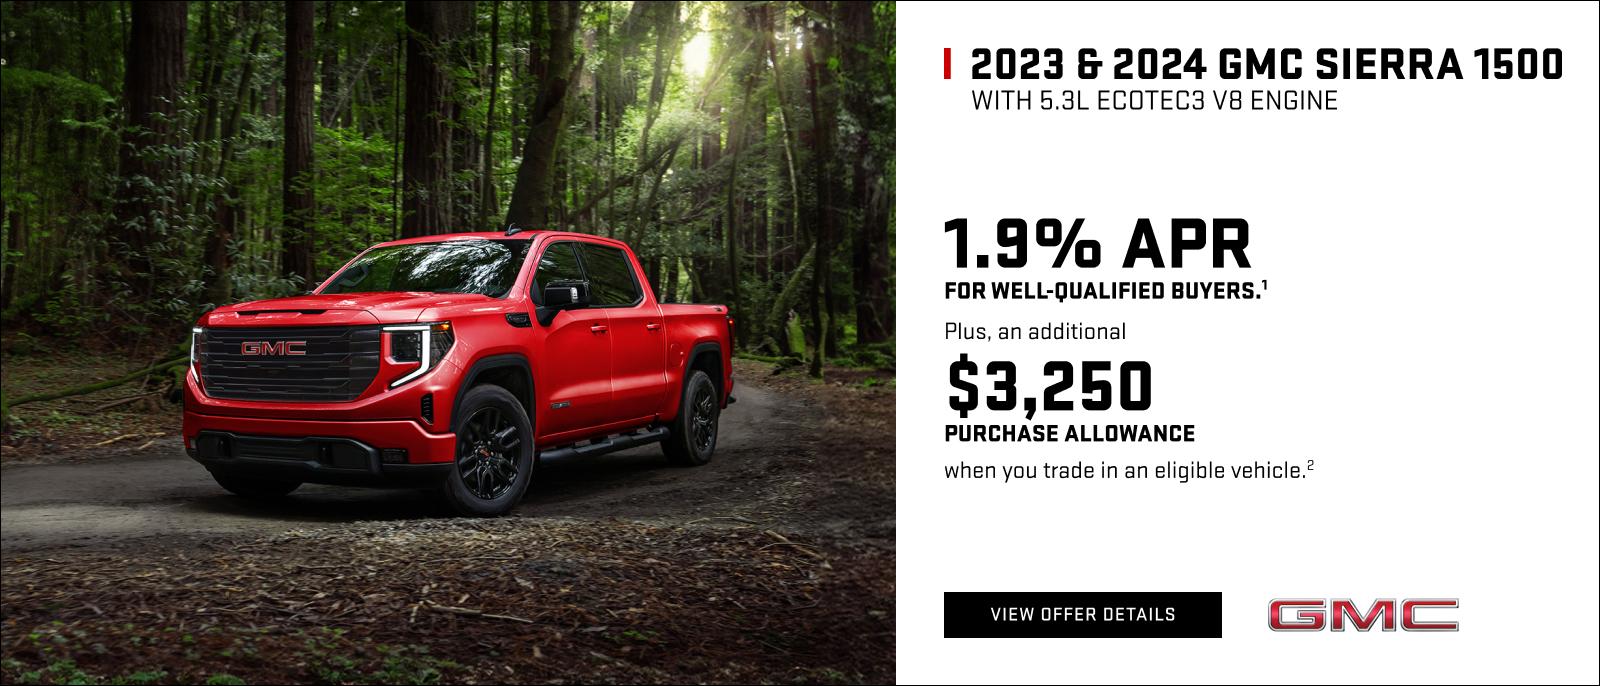 1.9% APR for well-qualified buyers.1

Plus, an additional $3,250 PURCHASE ALLOWANCE when you trade in an eligible vehicle.2